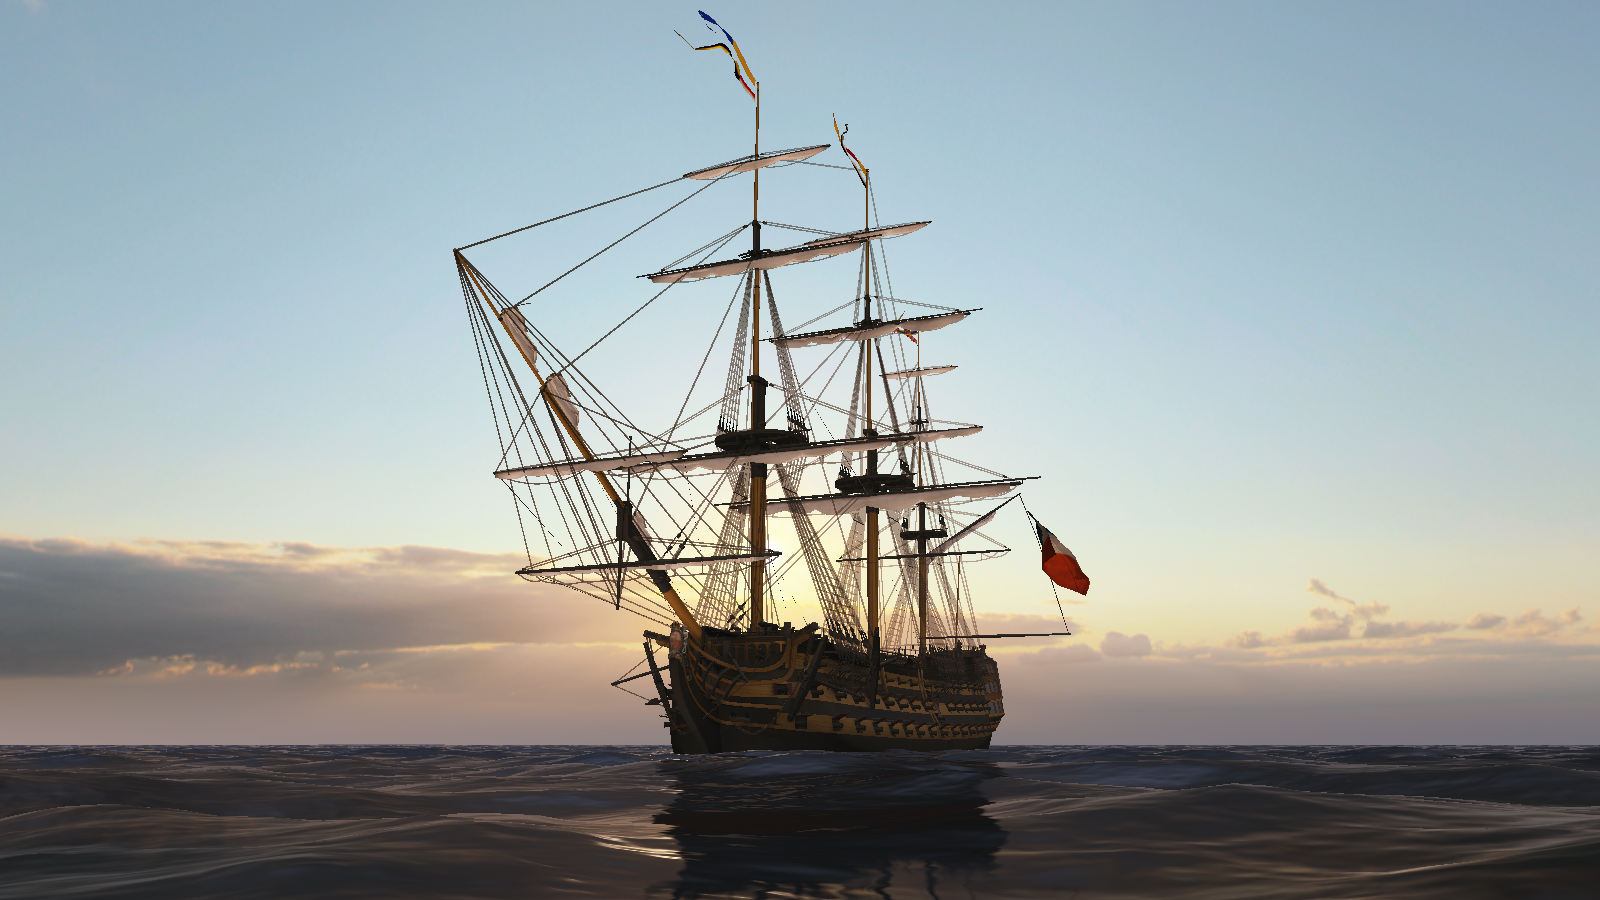 Hms Victory Members Albums Category Game Labs Forum